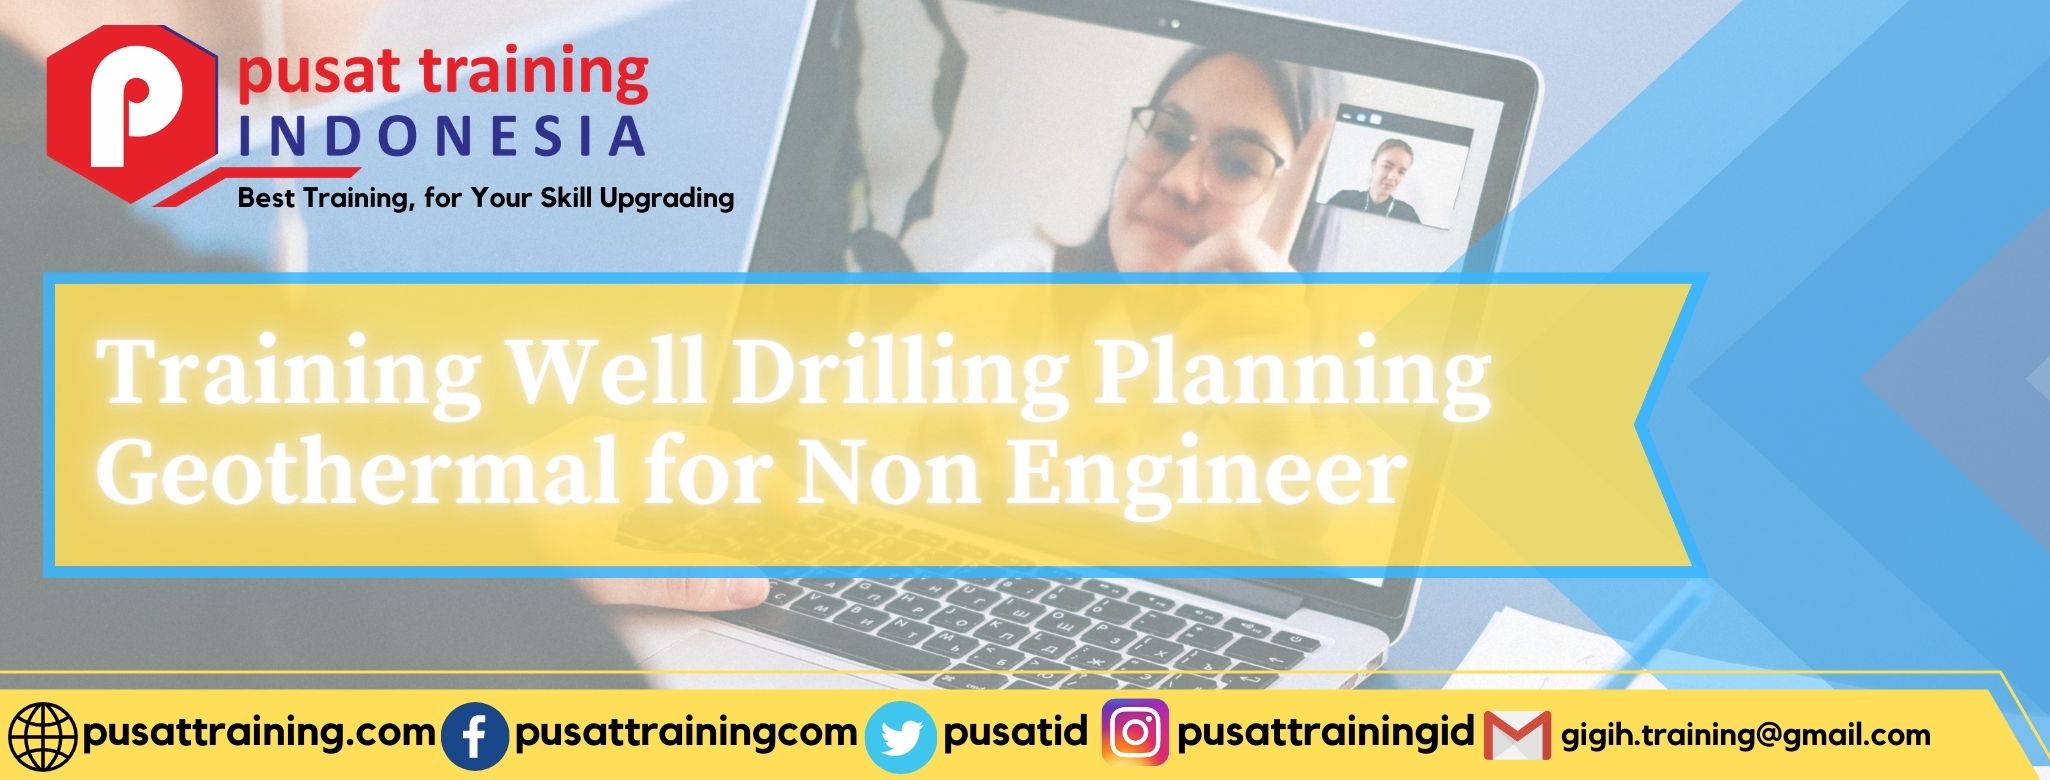 Training Well Drilling Planning Geothermal for Non Engineer